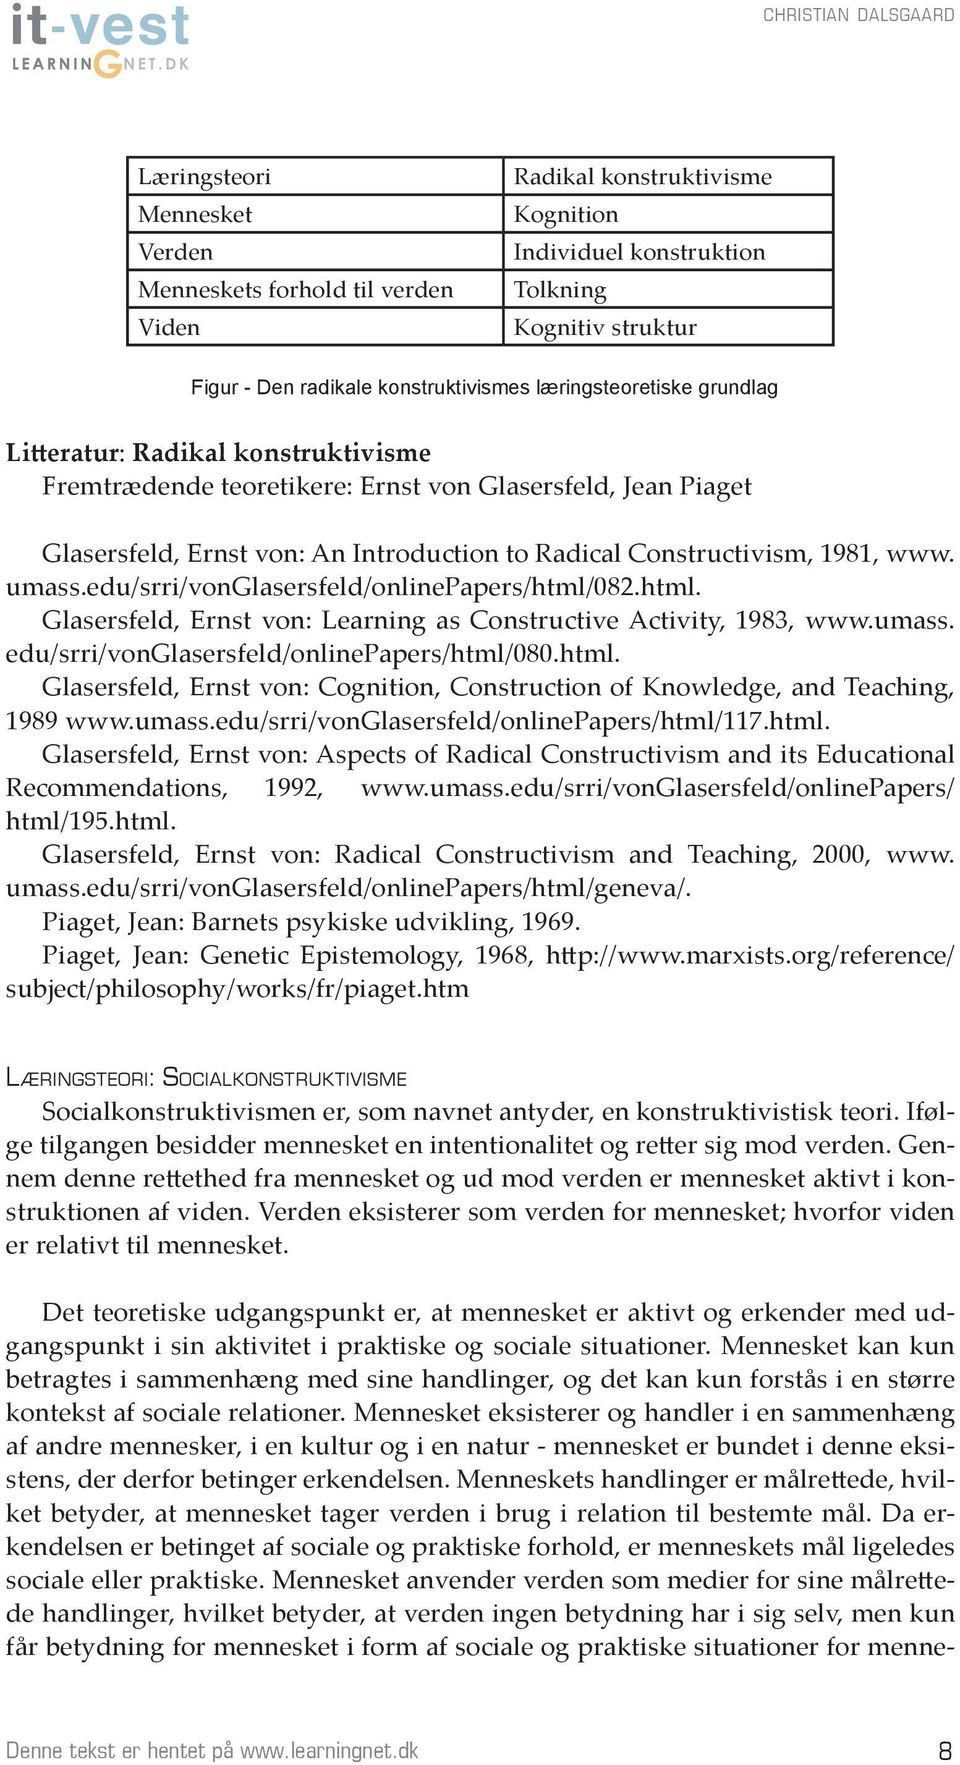 umass.edu/srri/vonglasersfeld/onlinepapers/html/082.html. Glasersfeld, Ernst von: Learning as Constructive Activity, 1983, www.umass. edu/srri/vonglasersfeld/onlinepapers/html/080.html. Glasersfeld, Ernst von: Cognition, Construction of Knowledge, and Teaching, 1989 www.